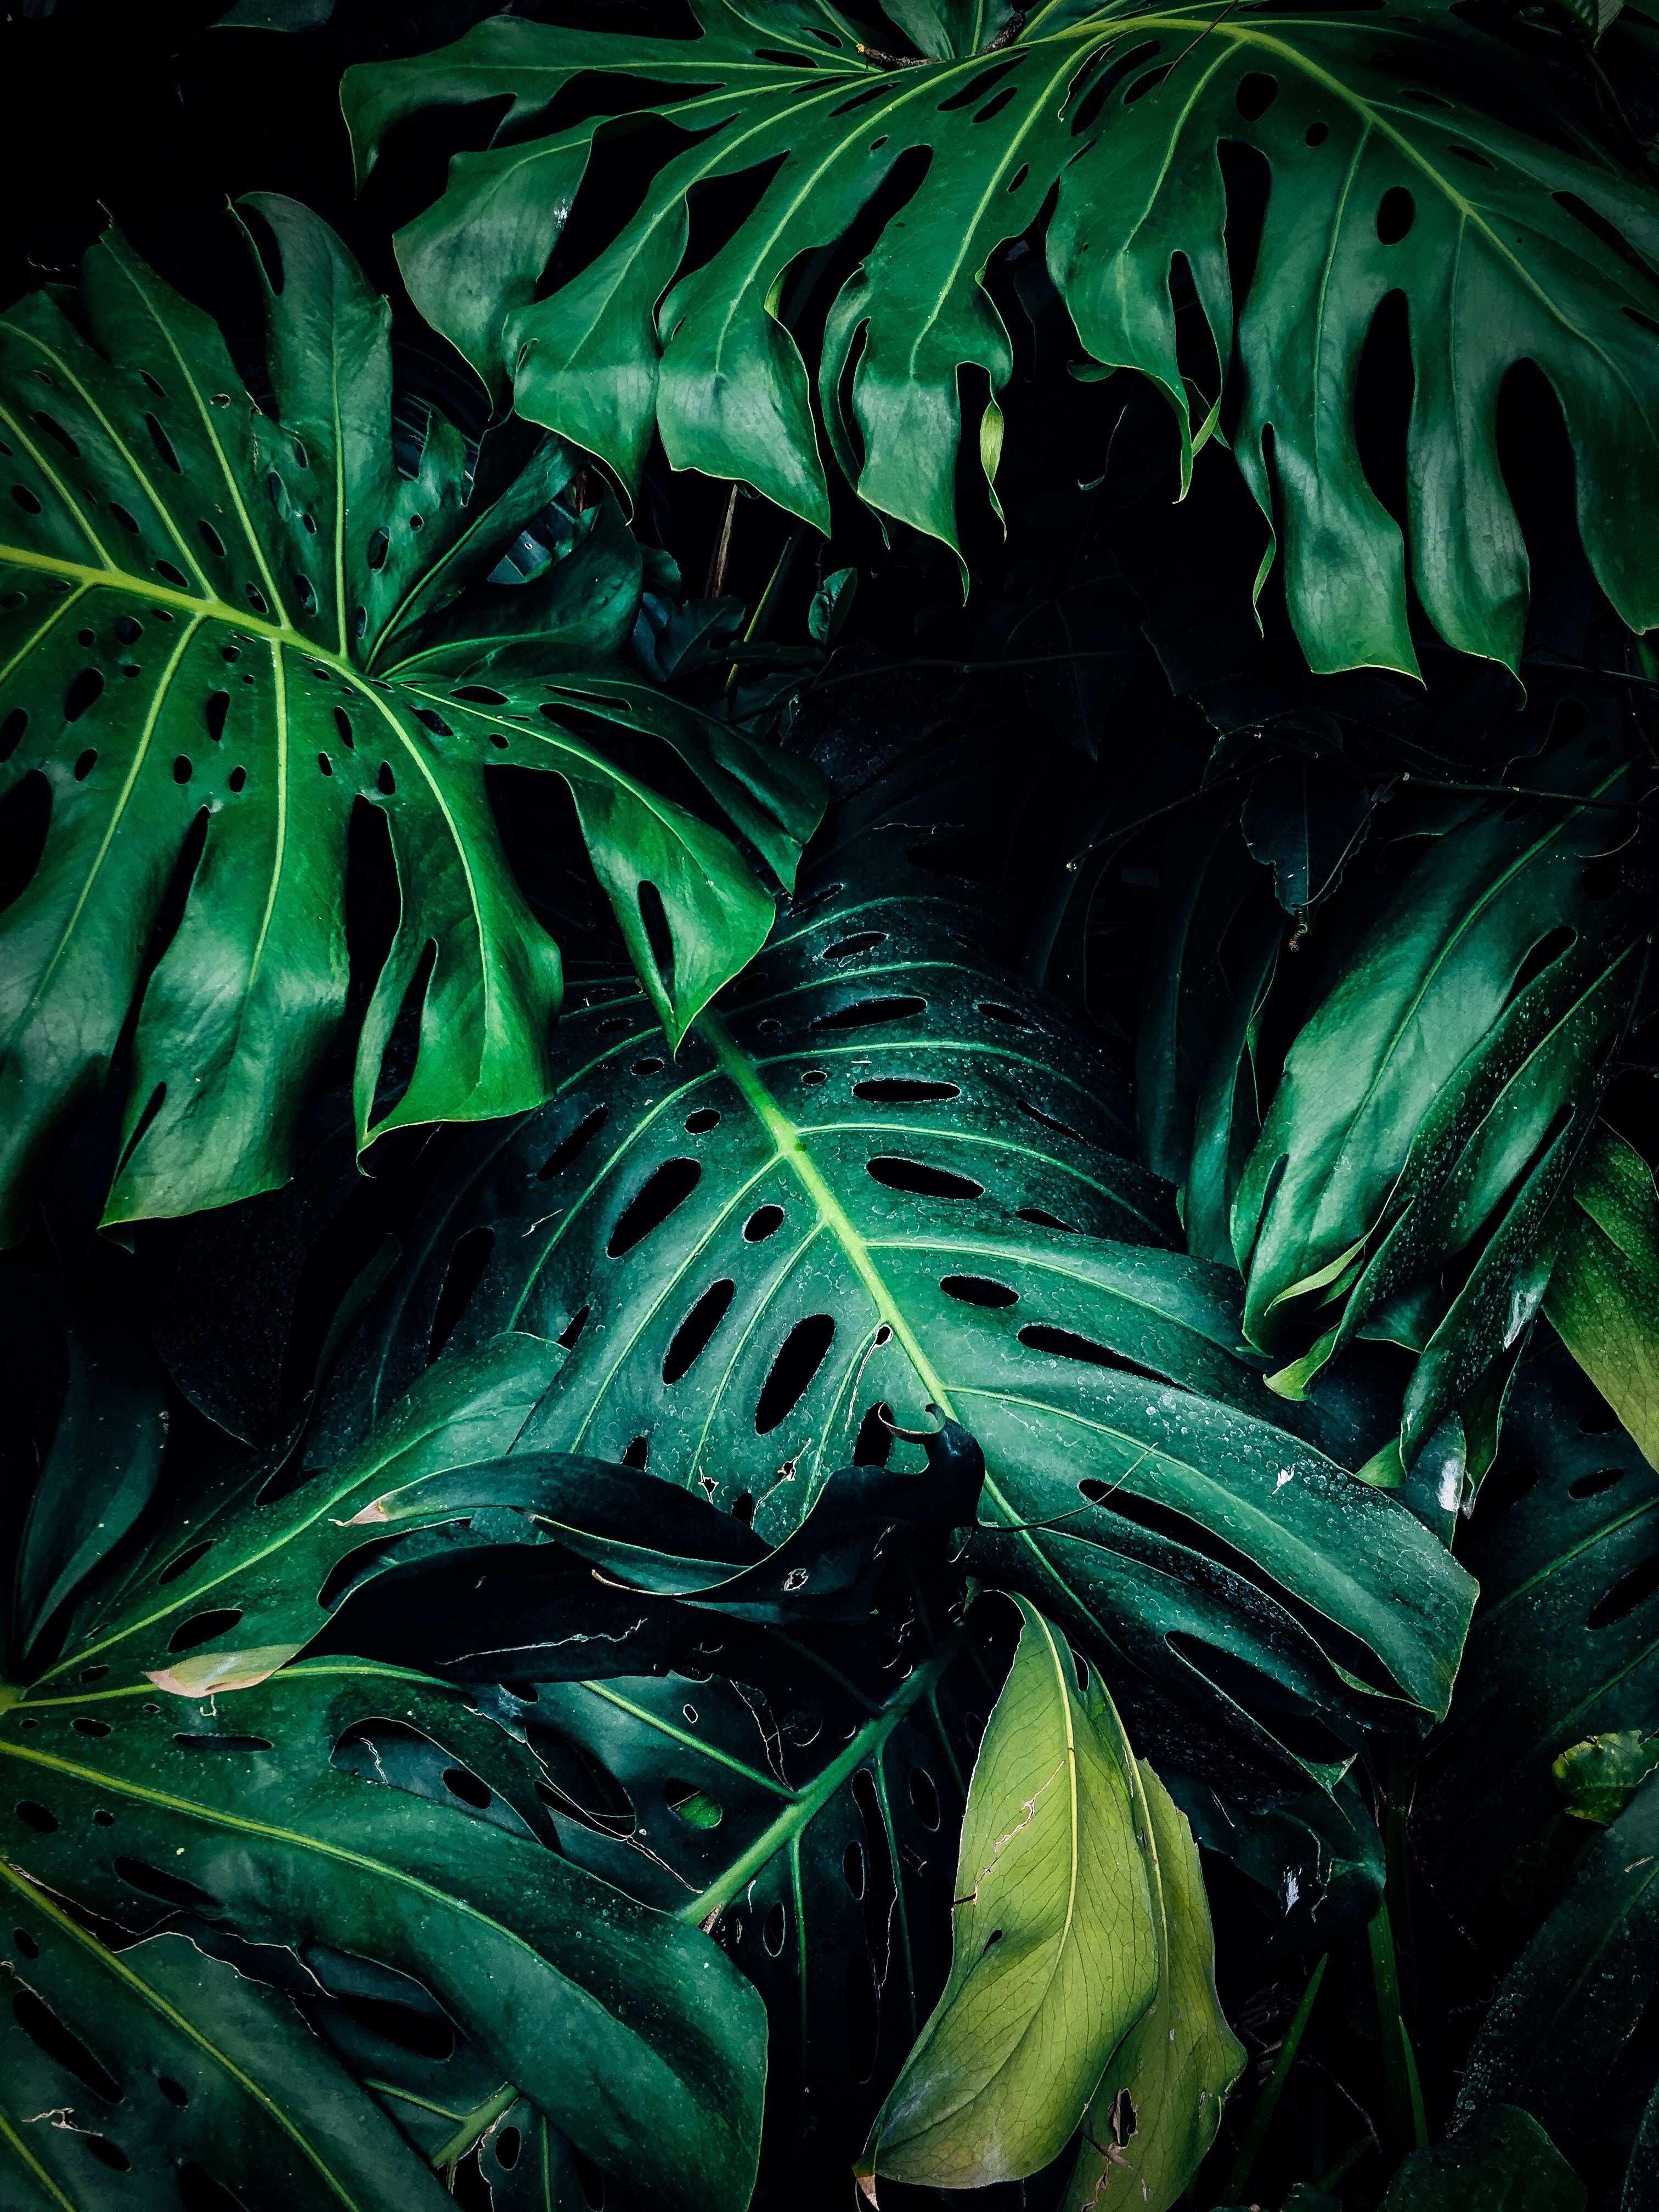 A close up of some green leaves - Tropical, Monstera